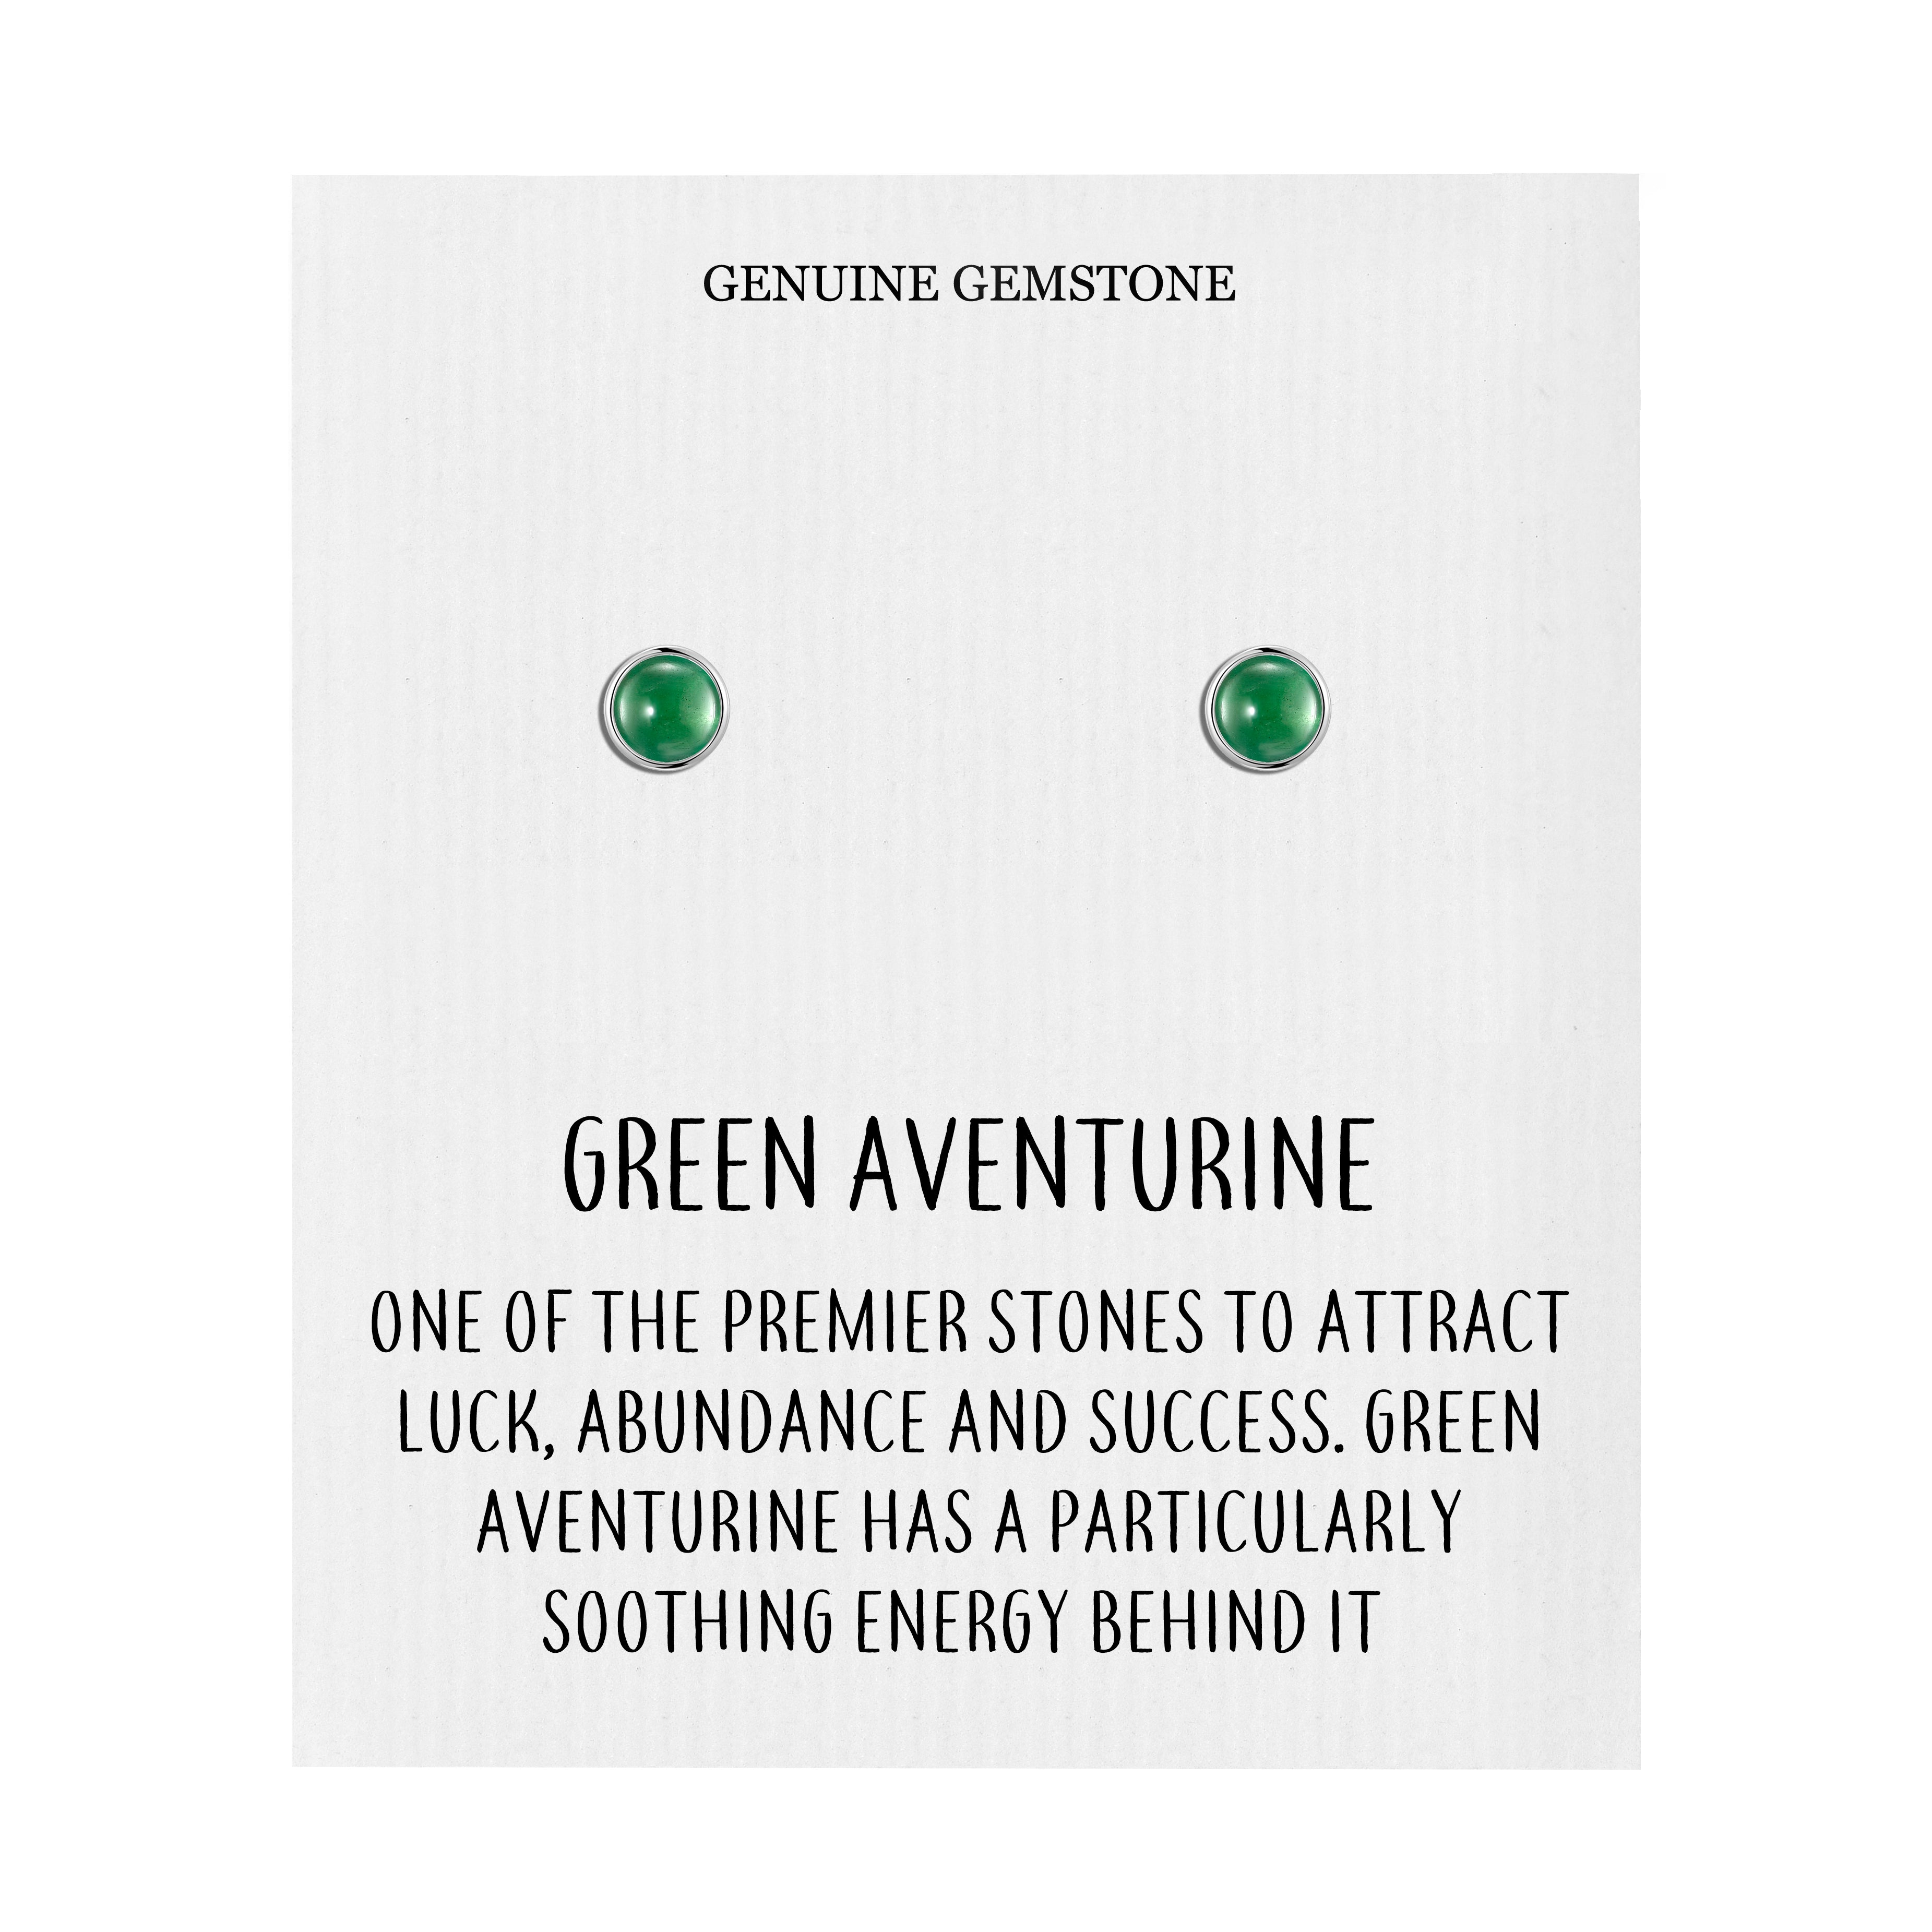 Green Aventurine Stud Earrings with Quote Card